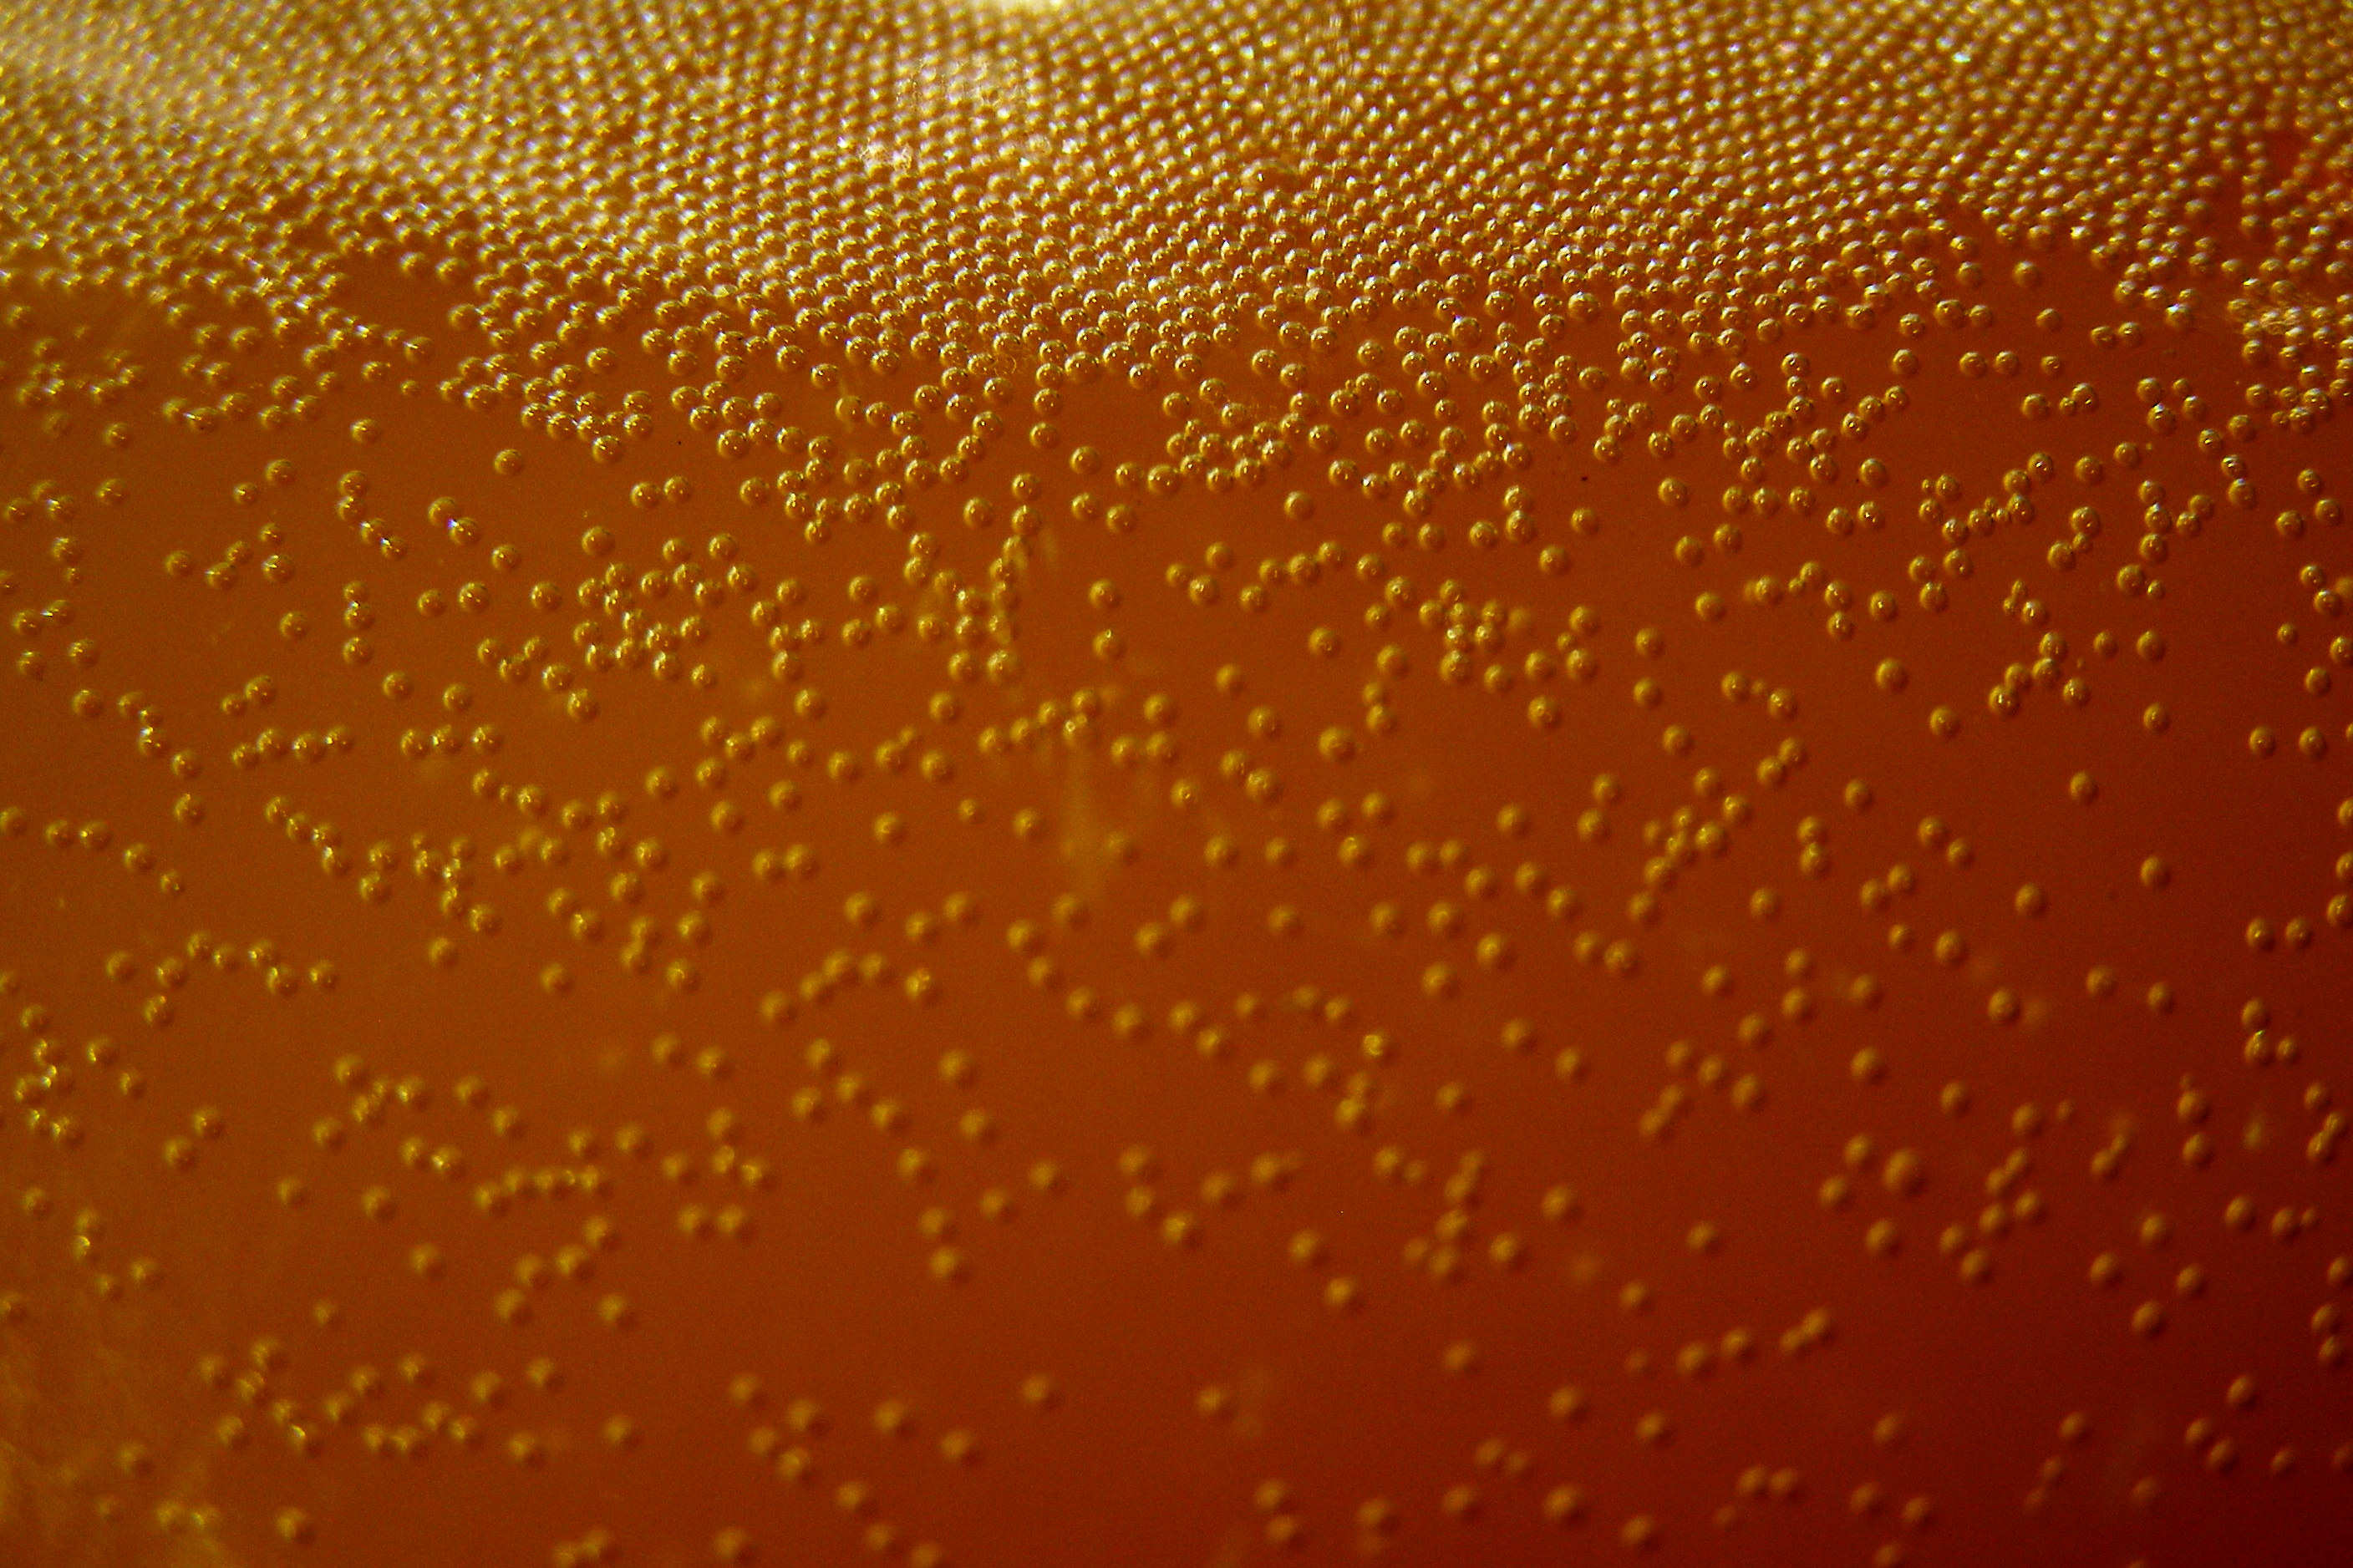 Rising bubbles from yeast fermentation 2